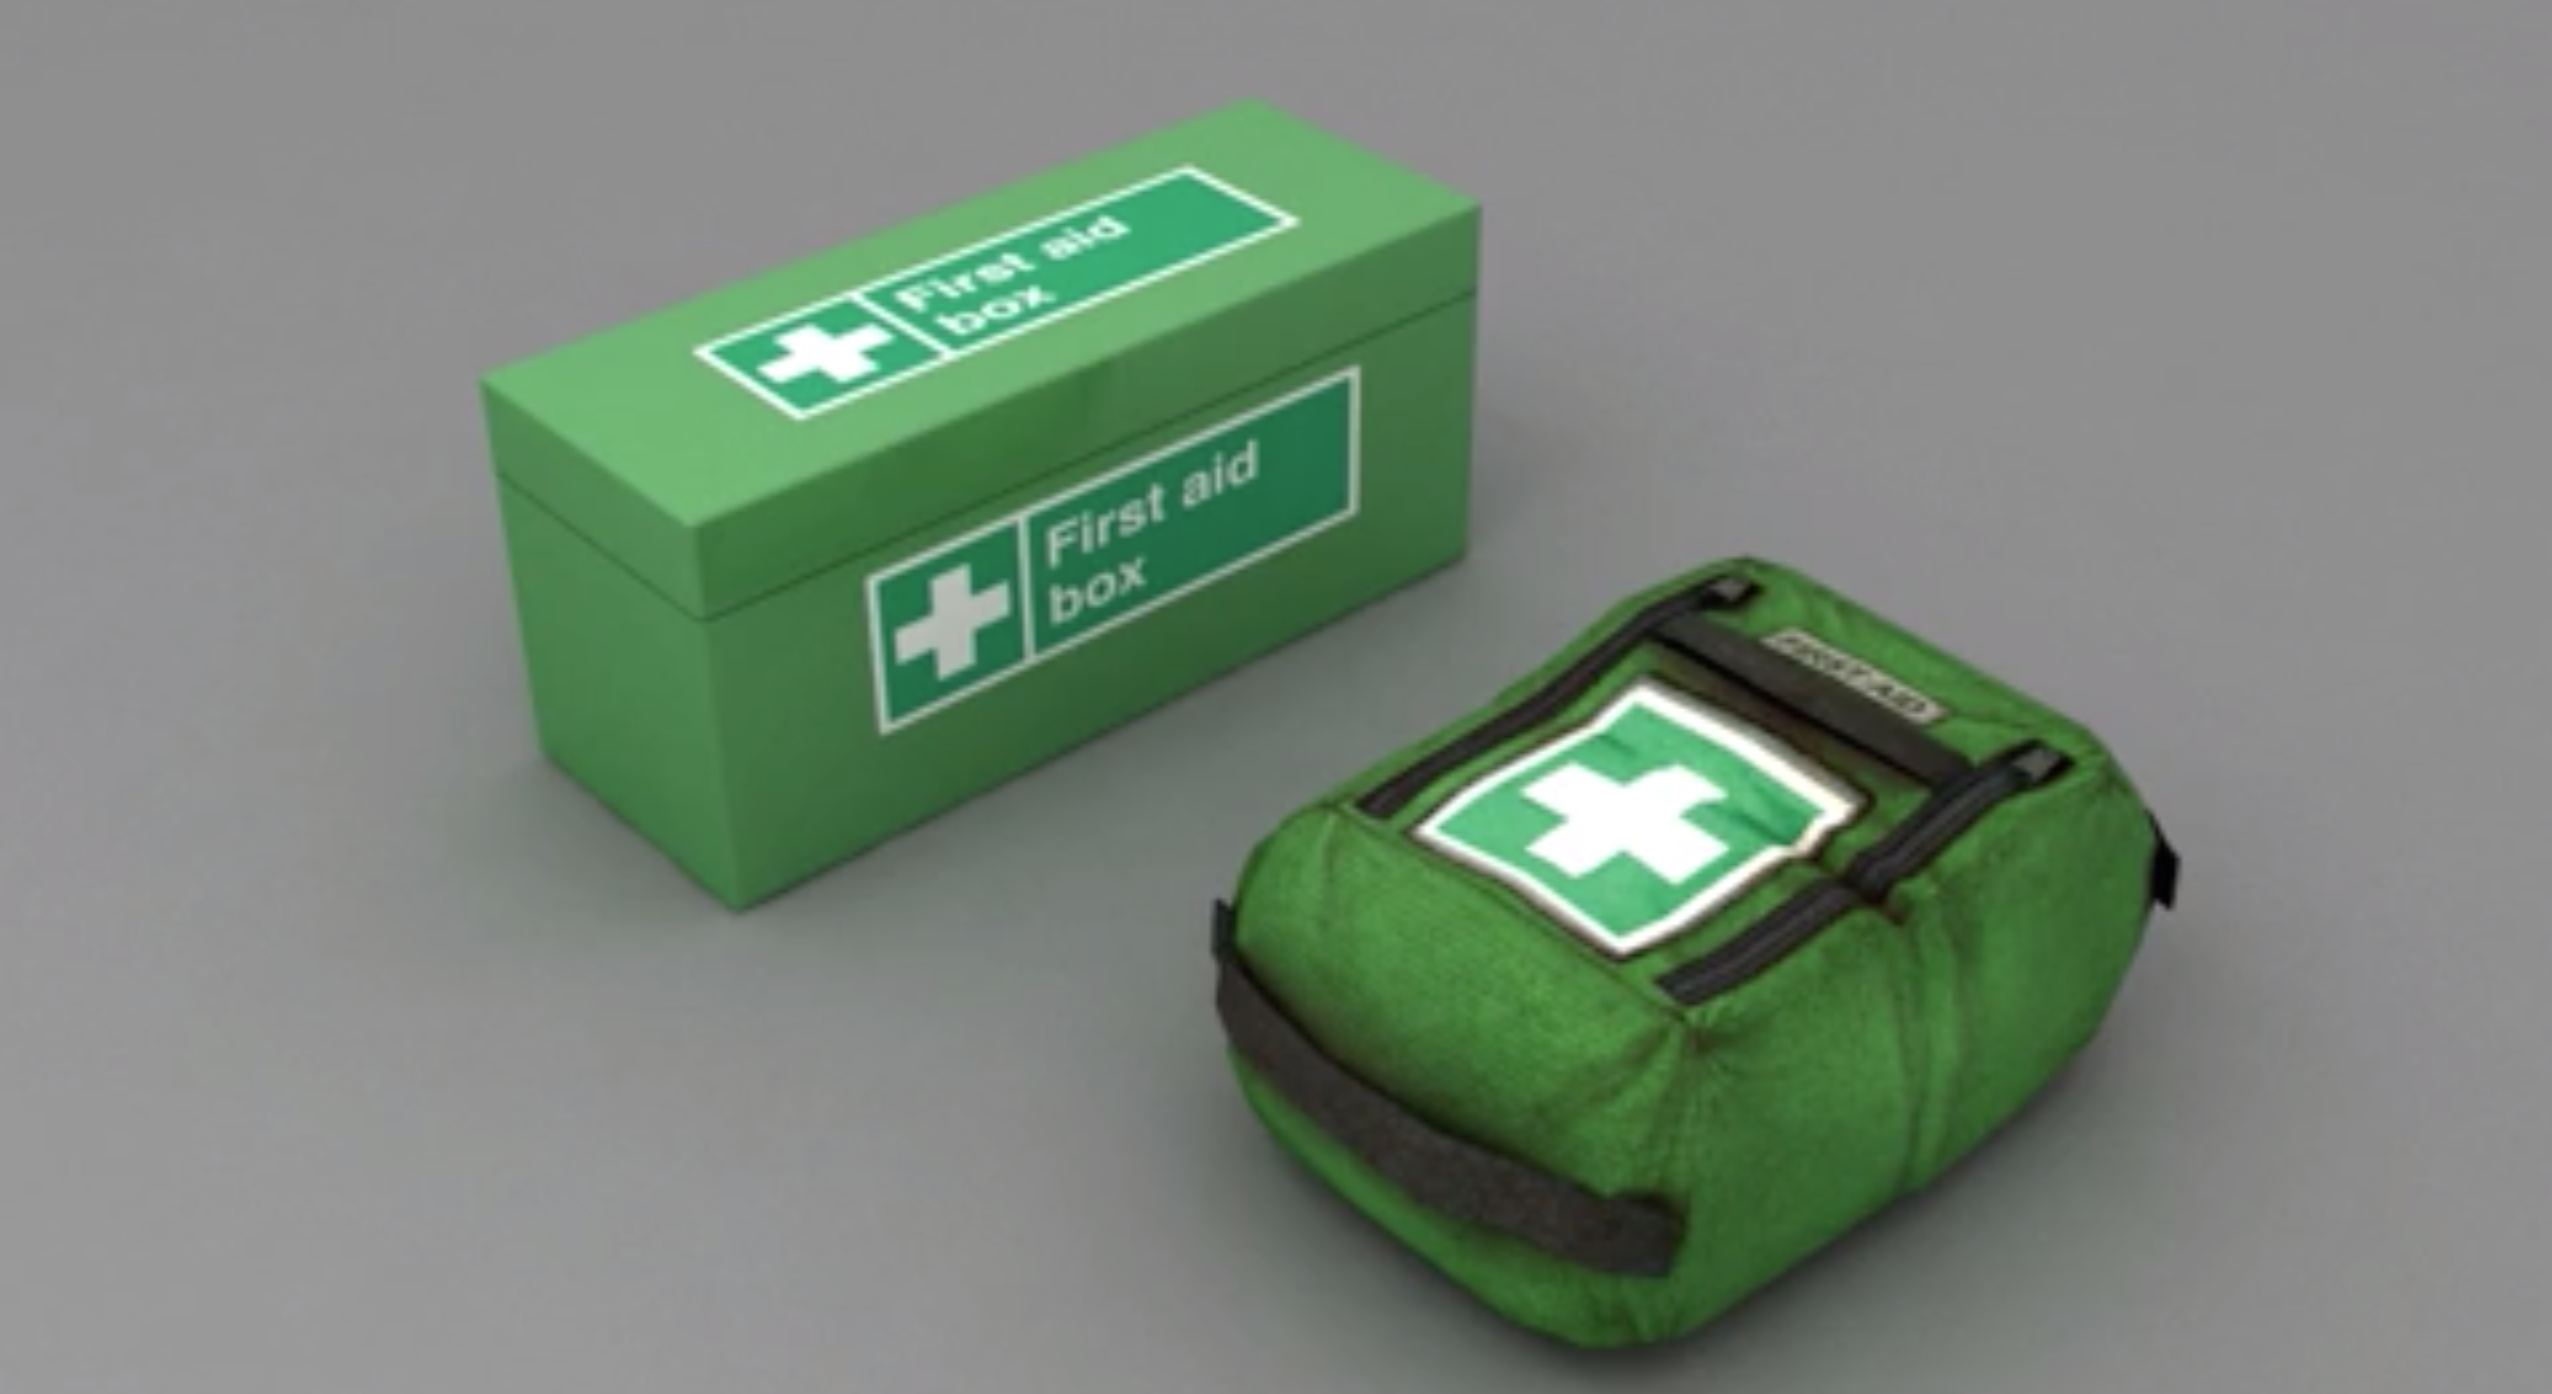 First Aid Requirements & RIDDOR